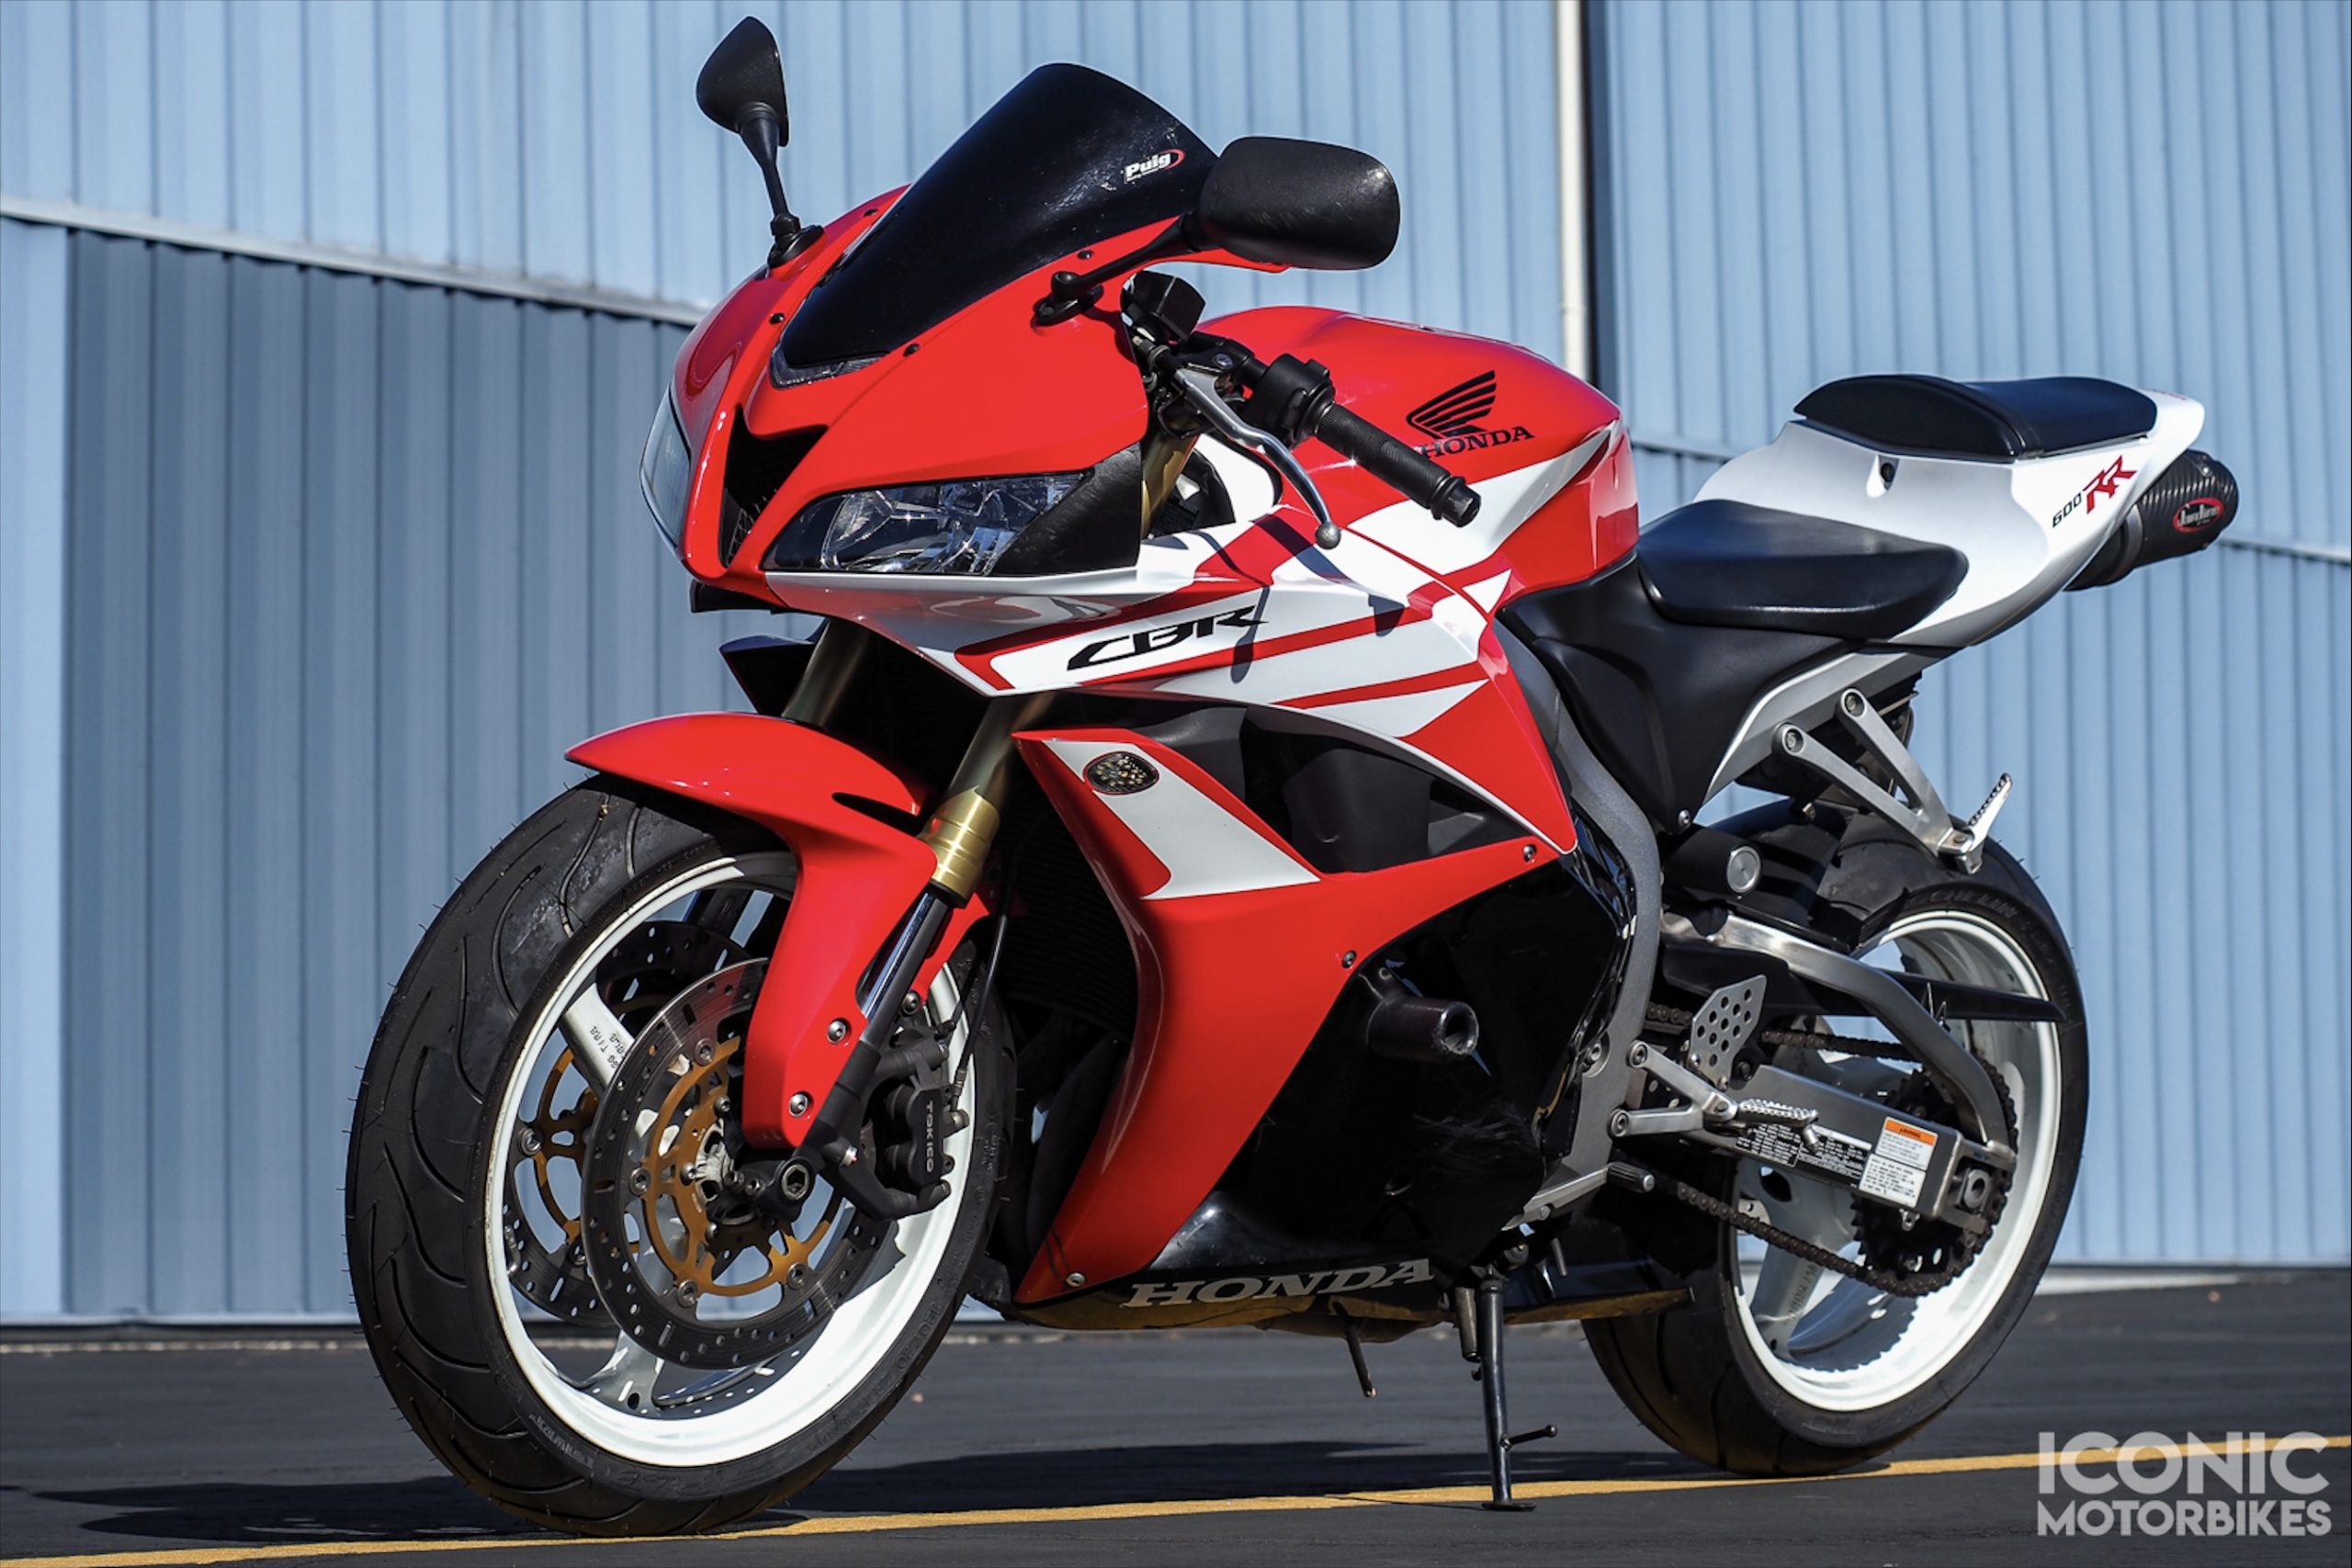 Learn About 99 Images Honda Cbr 600 For Sale Under 5000 In